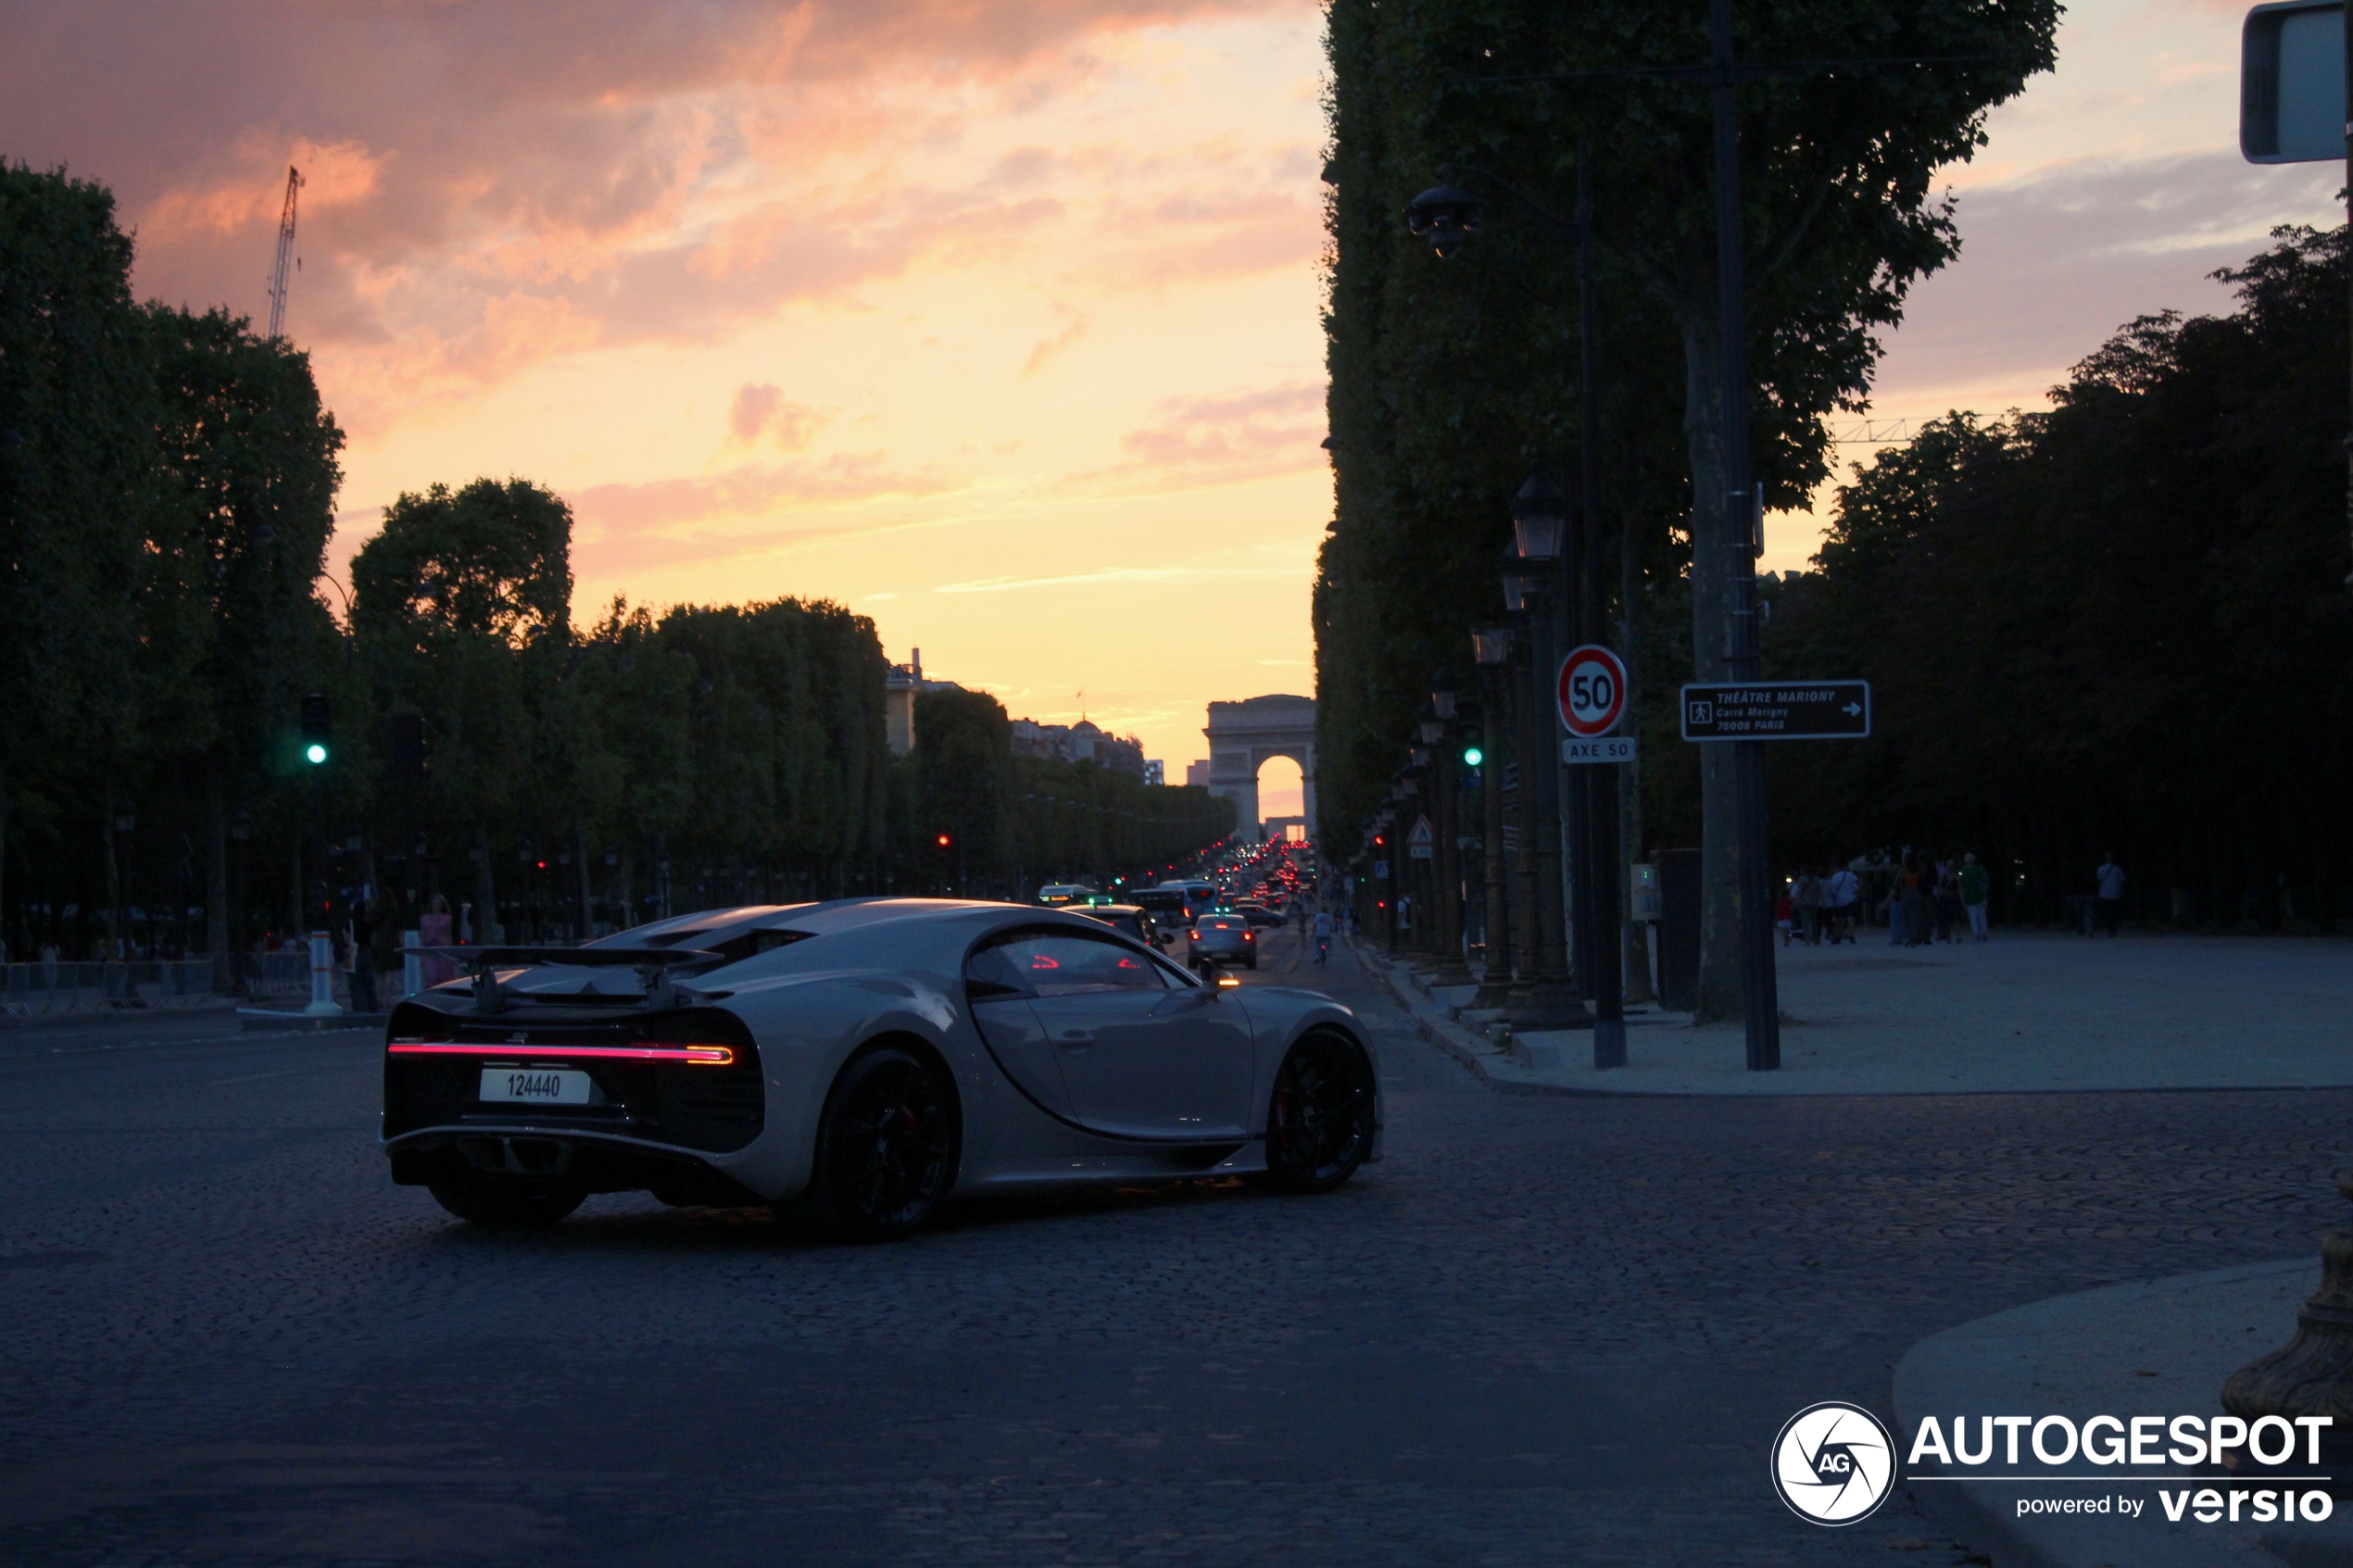 A Chiron shows up in paris during a beautiful sunset